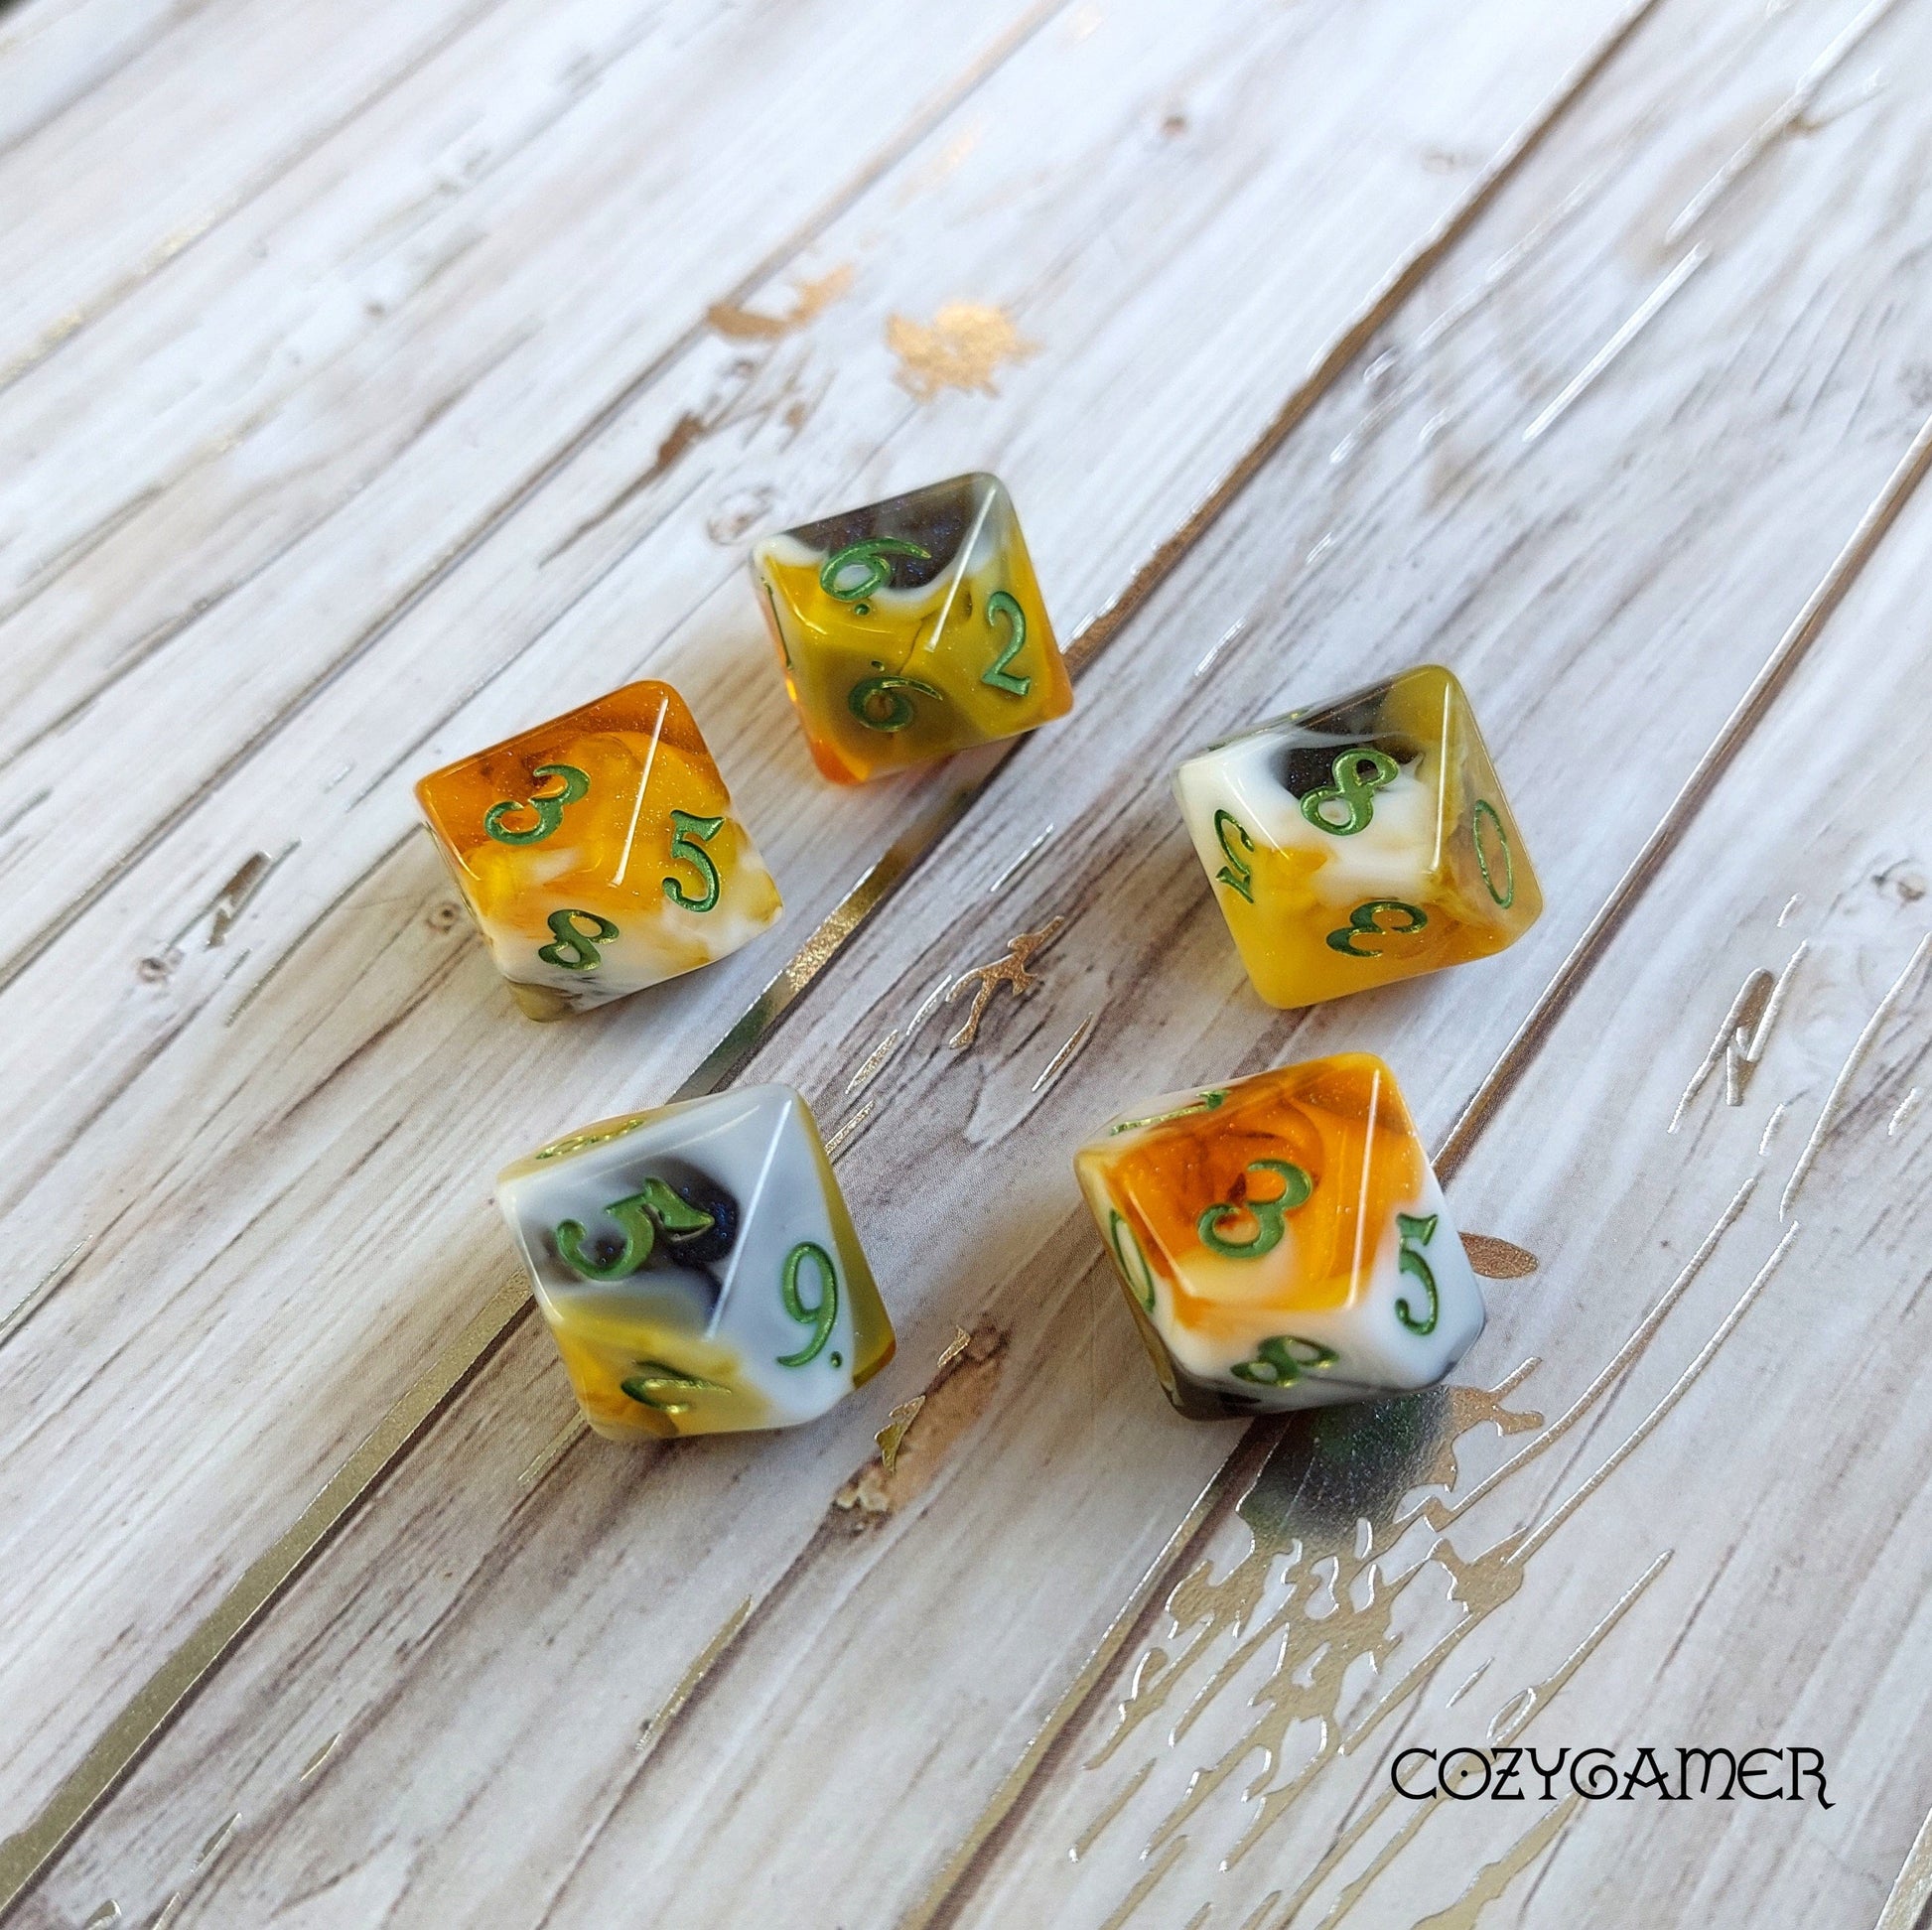 Calico Cat Dice Set, Marbled Orange, Black, and White Cat themed DND Dice. 12 Piece, 8 Piece, D10, and D6 Sets D10 Set